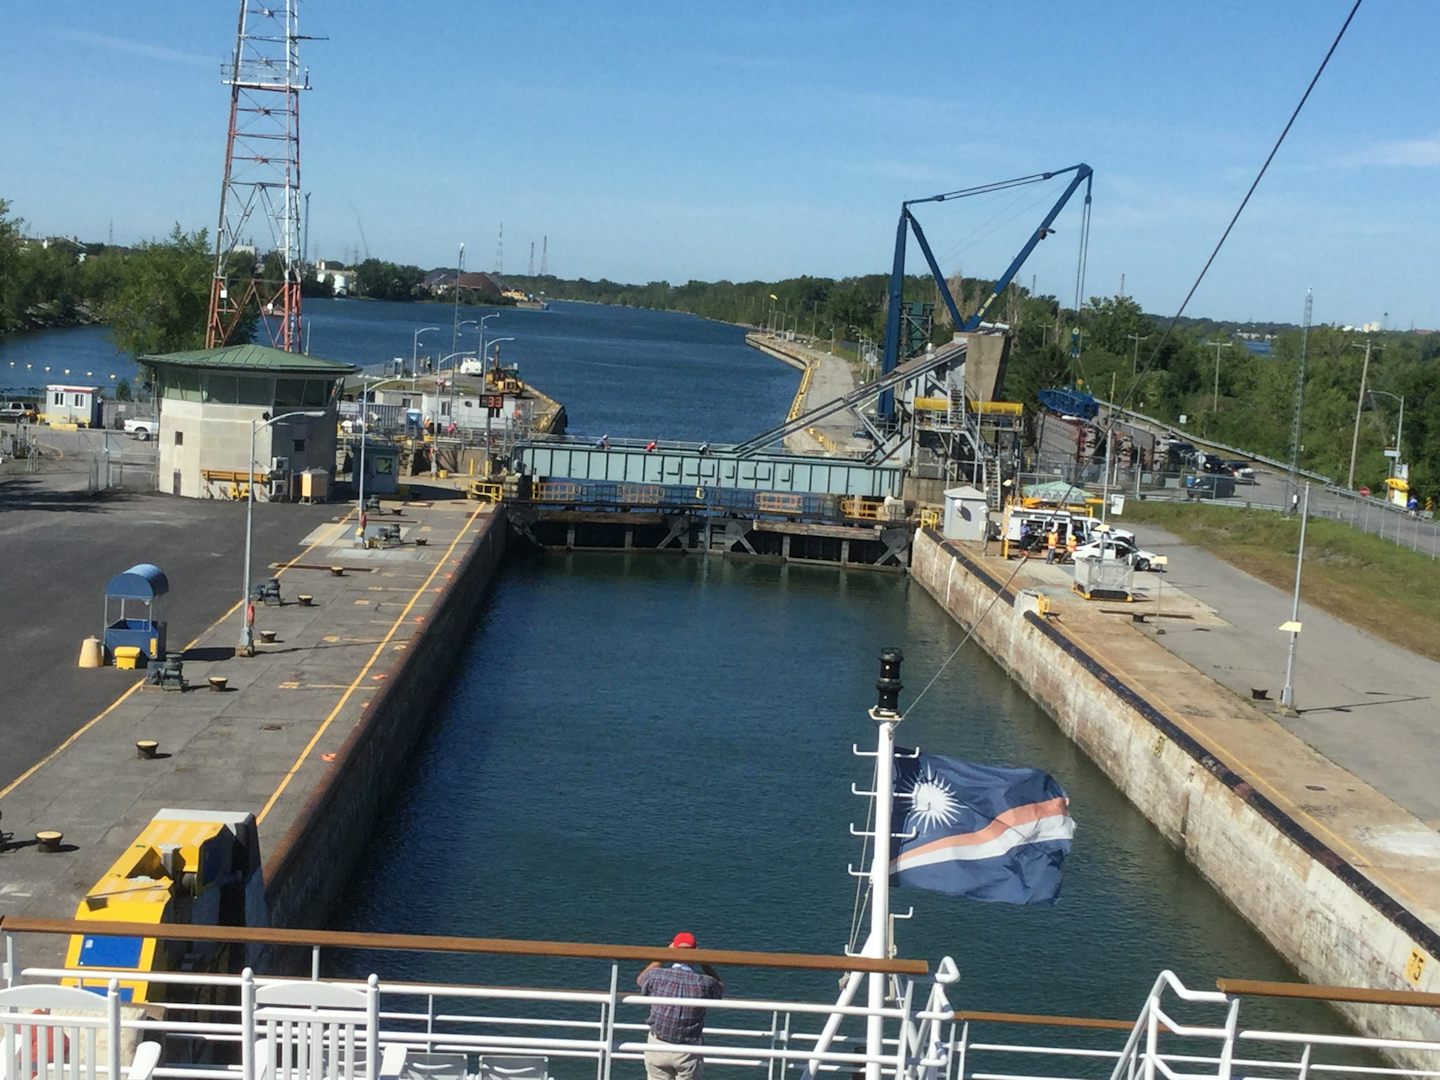 Entering a lock the on St Lawrence Seaway